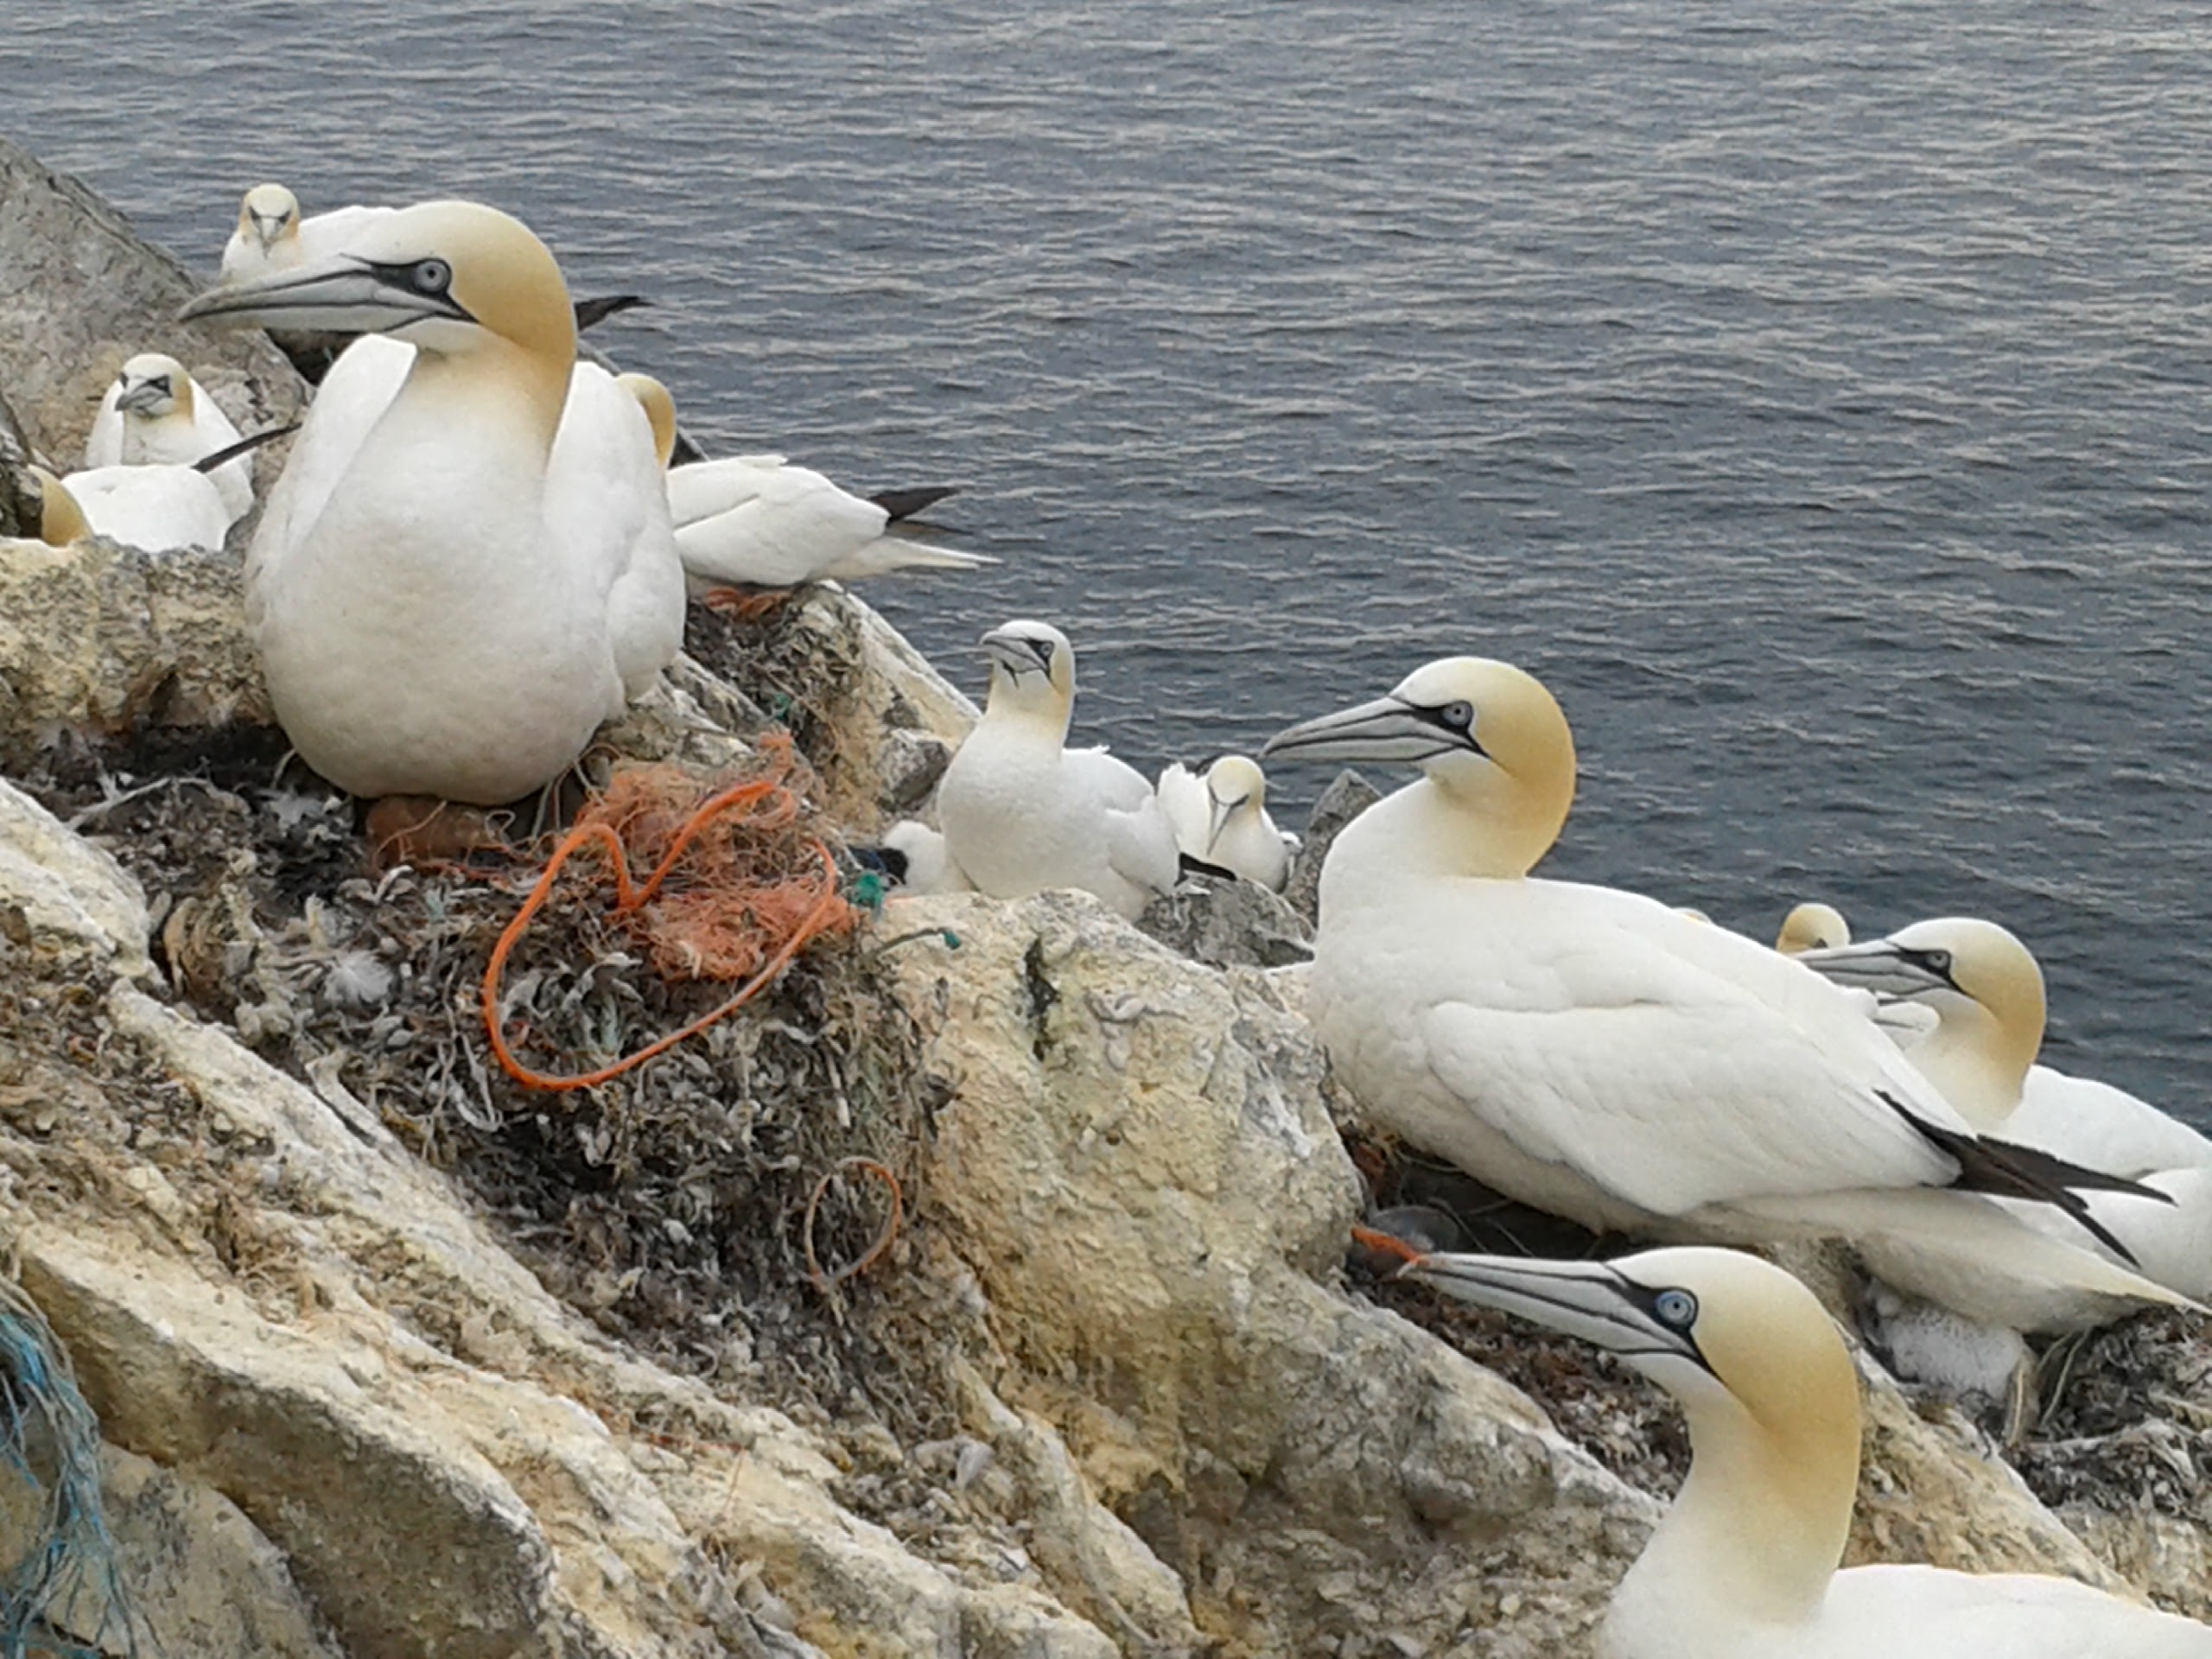 Gannets breeding on 'Les Etacs' off the coast of Alderney, in the Channel Islands.